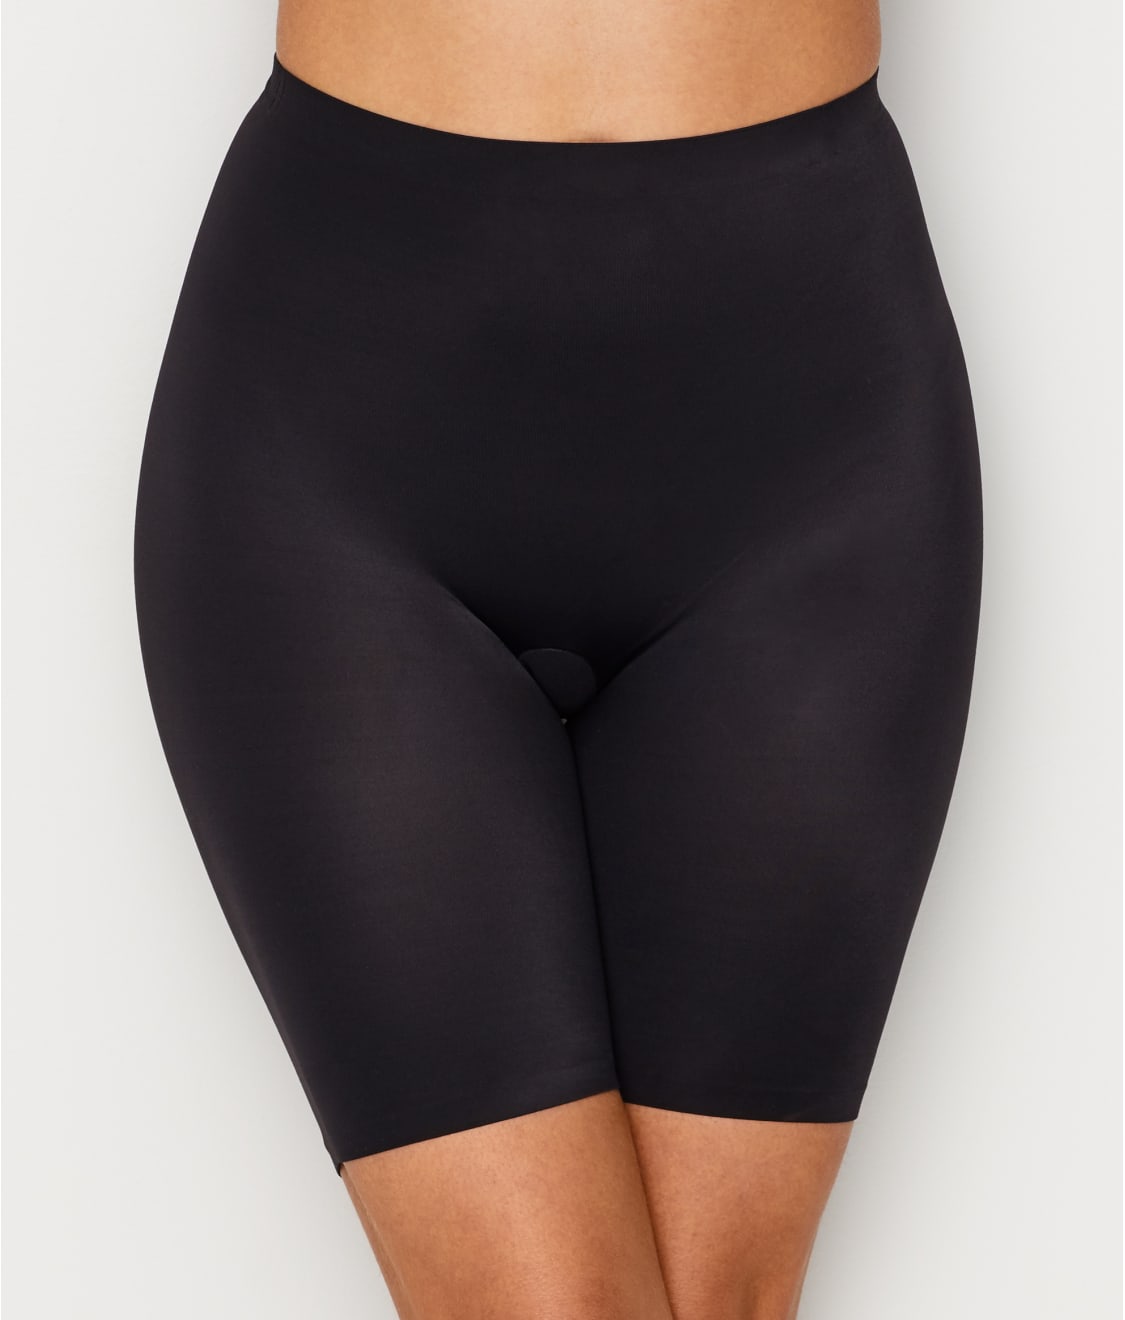 Maidenform: Cover Your Bases Smoothing Mid-Thigh Shaper DM0035